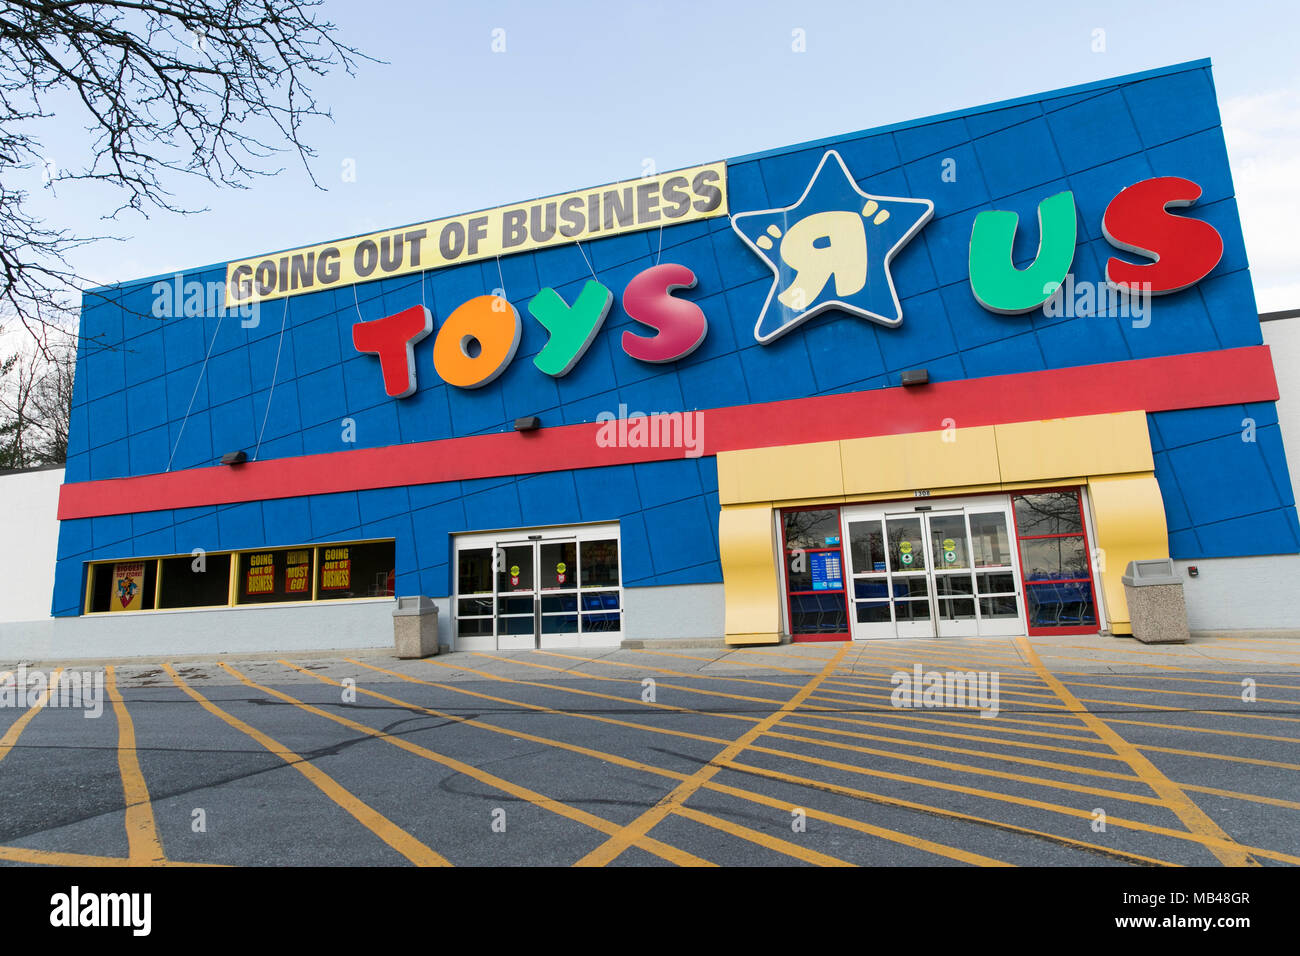 Frederick, Maryland, USA. 5th Apr, 2018. A logo sign outside of a Toys 'R' Us retail store in Frederick, Maryland with 'Going Out Of Business' signage on April 5, 2018. The toy retailer, which has struggled under a heavy debt load, announced its bankruptcy and plan to liquidate all of its stores in March. Credit: Kristoffer Tripplaar/Alamy Live News Stock Photo